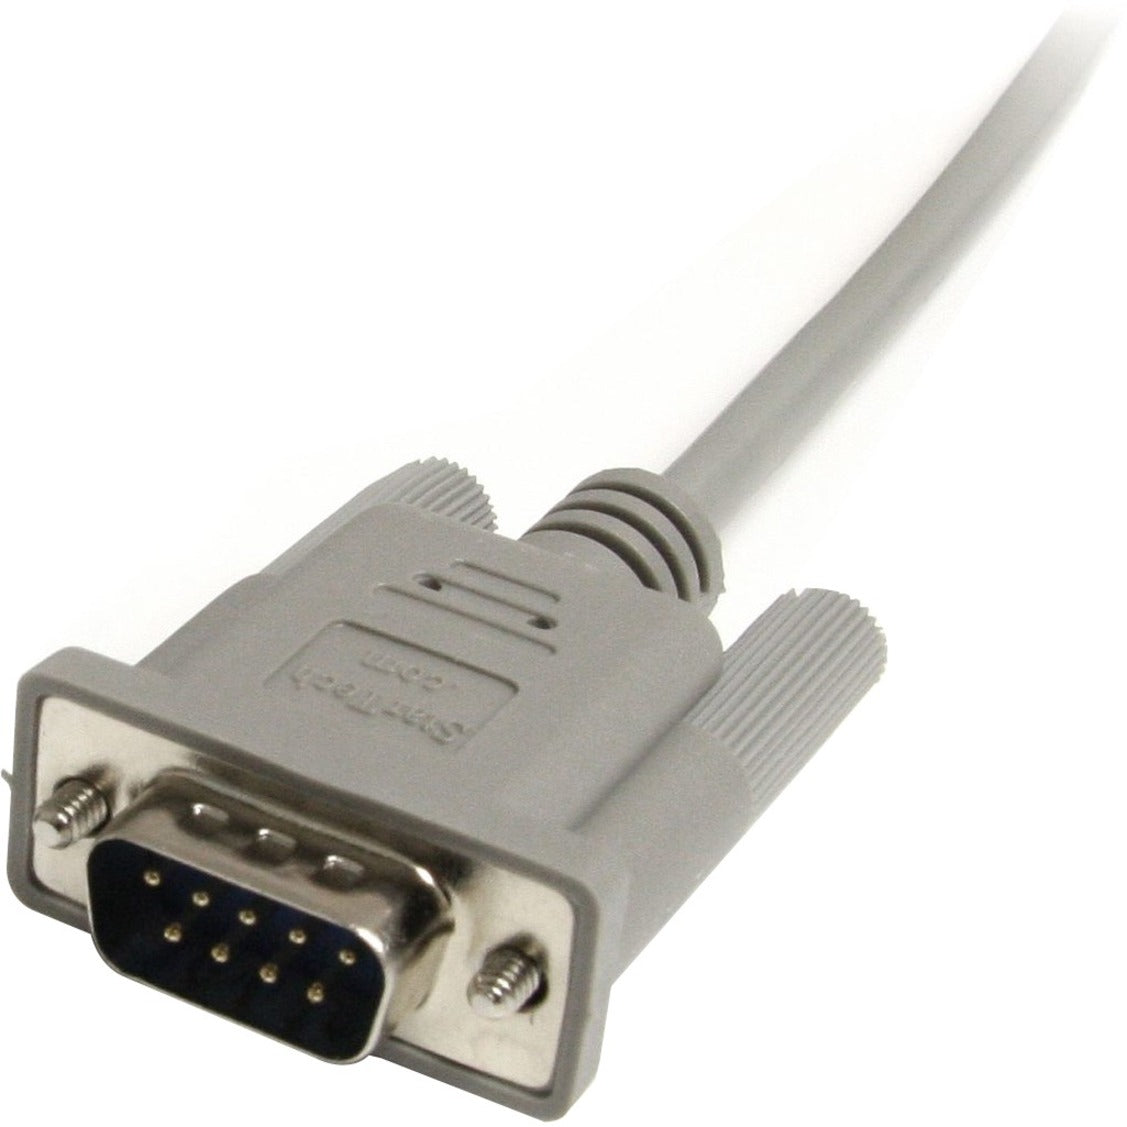 StarTech.com MXT10010 VGA Monitor Straight Through Serial Cable, 10 ft, Male to Female